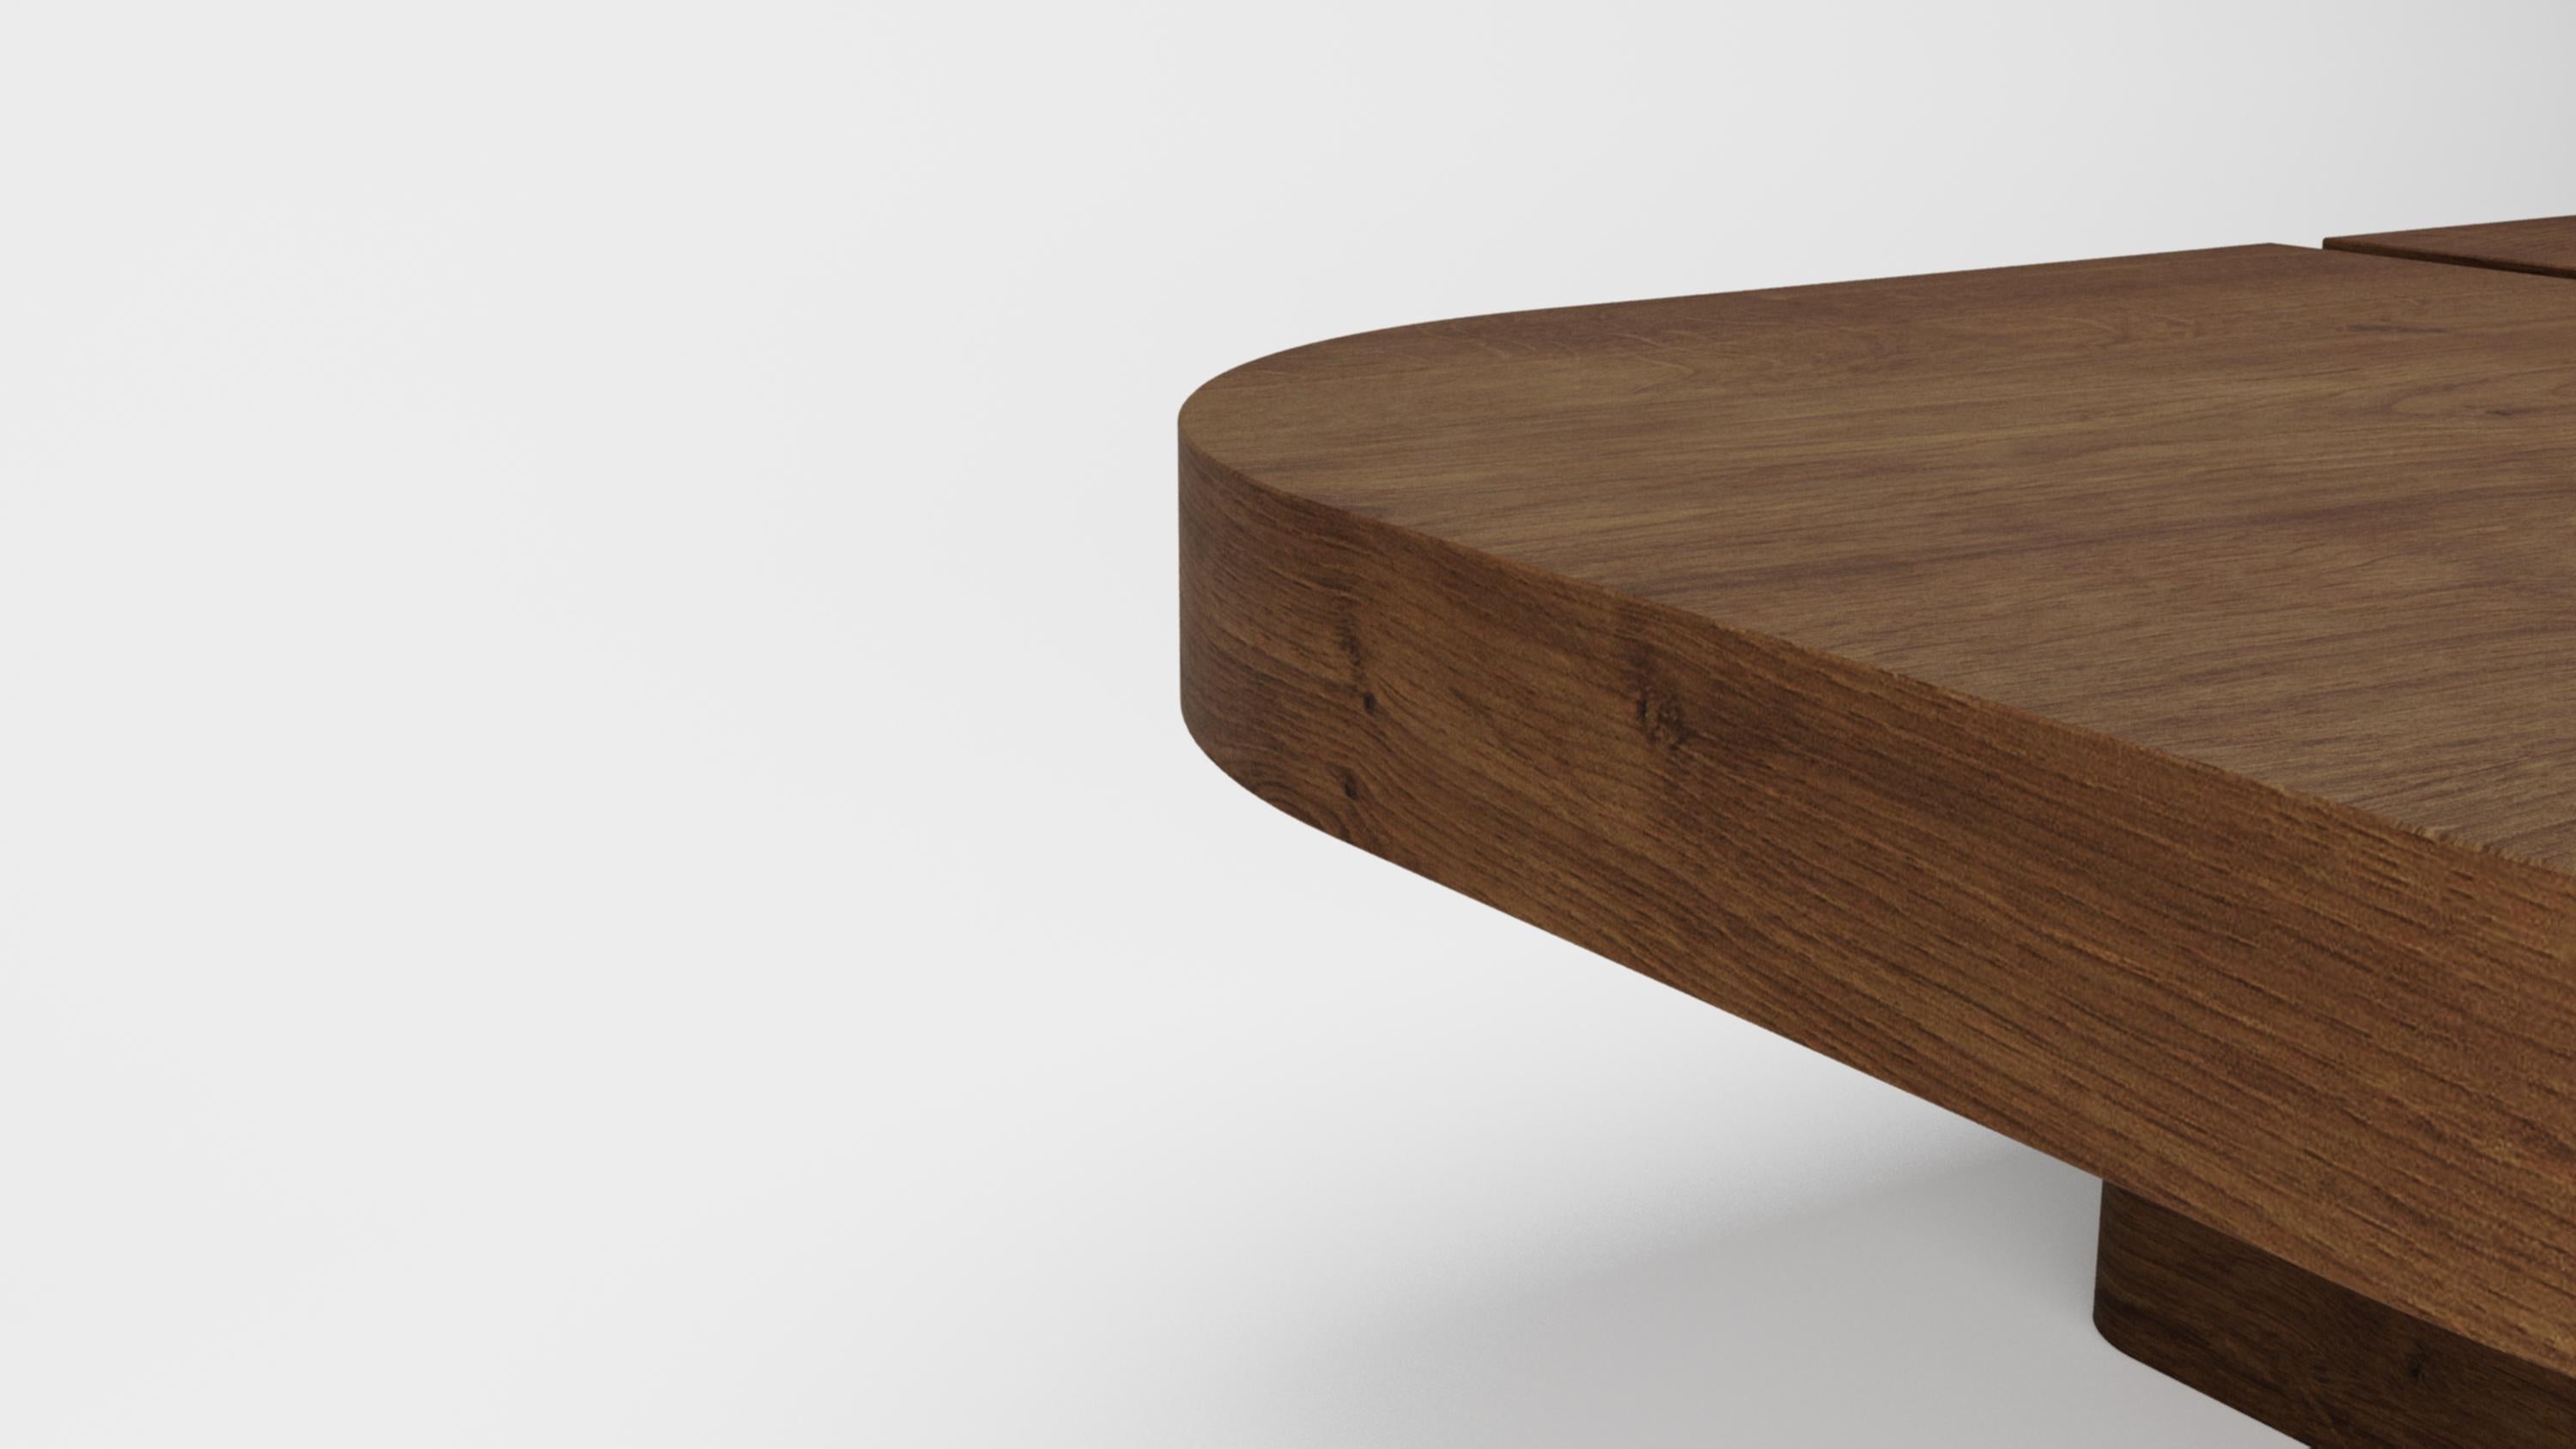 Collector - Designed by Studio Rig MecoCenter Table Dark Oak

Collector brand was born and Portugal and aims to be part of daily life by fusing furniture to home routines and lifestyles. The company designs its pieces with the intention to embrace